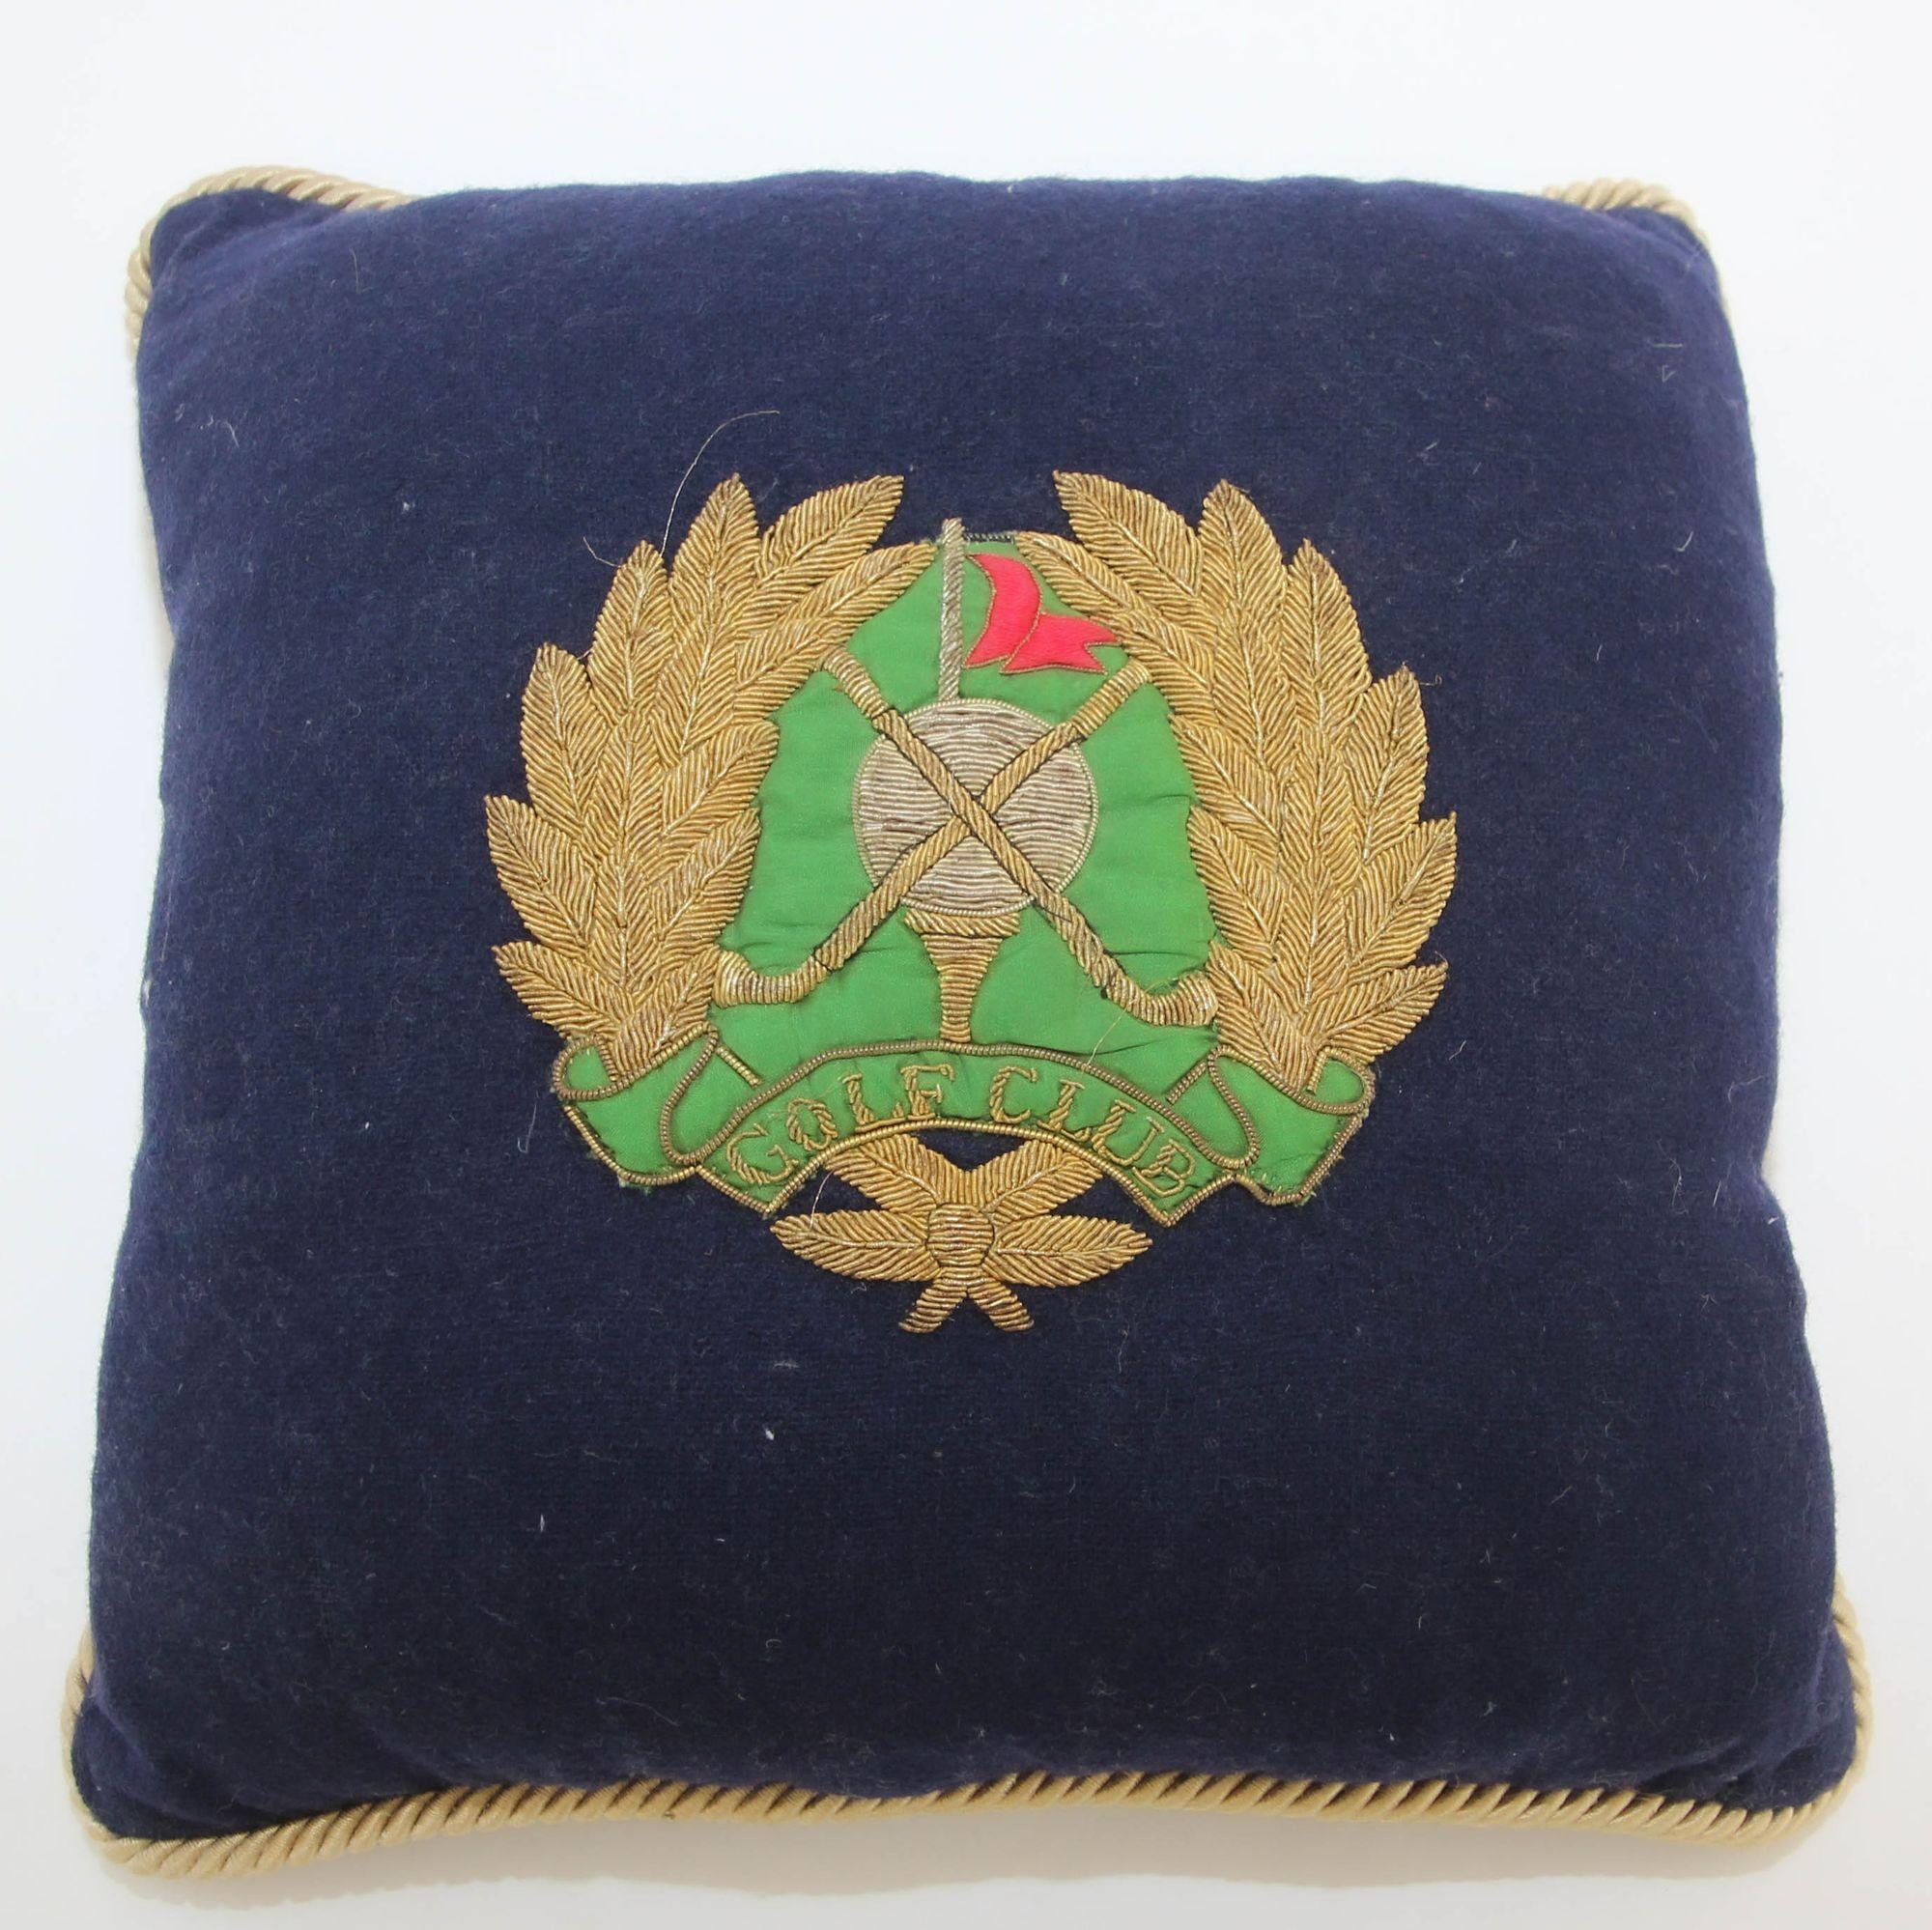 Vintage British royal golf club blue and gold thread embroidered pillow.
Hand embroidered in England.
Wool blue with embroidered gold thread, leaves and golf clubs.
Size: 12 in. x 12 in.
Condition: Distressed back.
Circa 1950's.